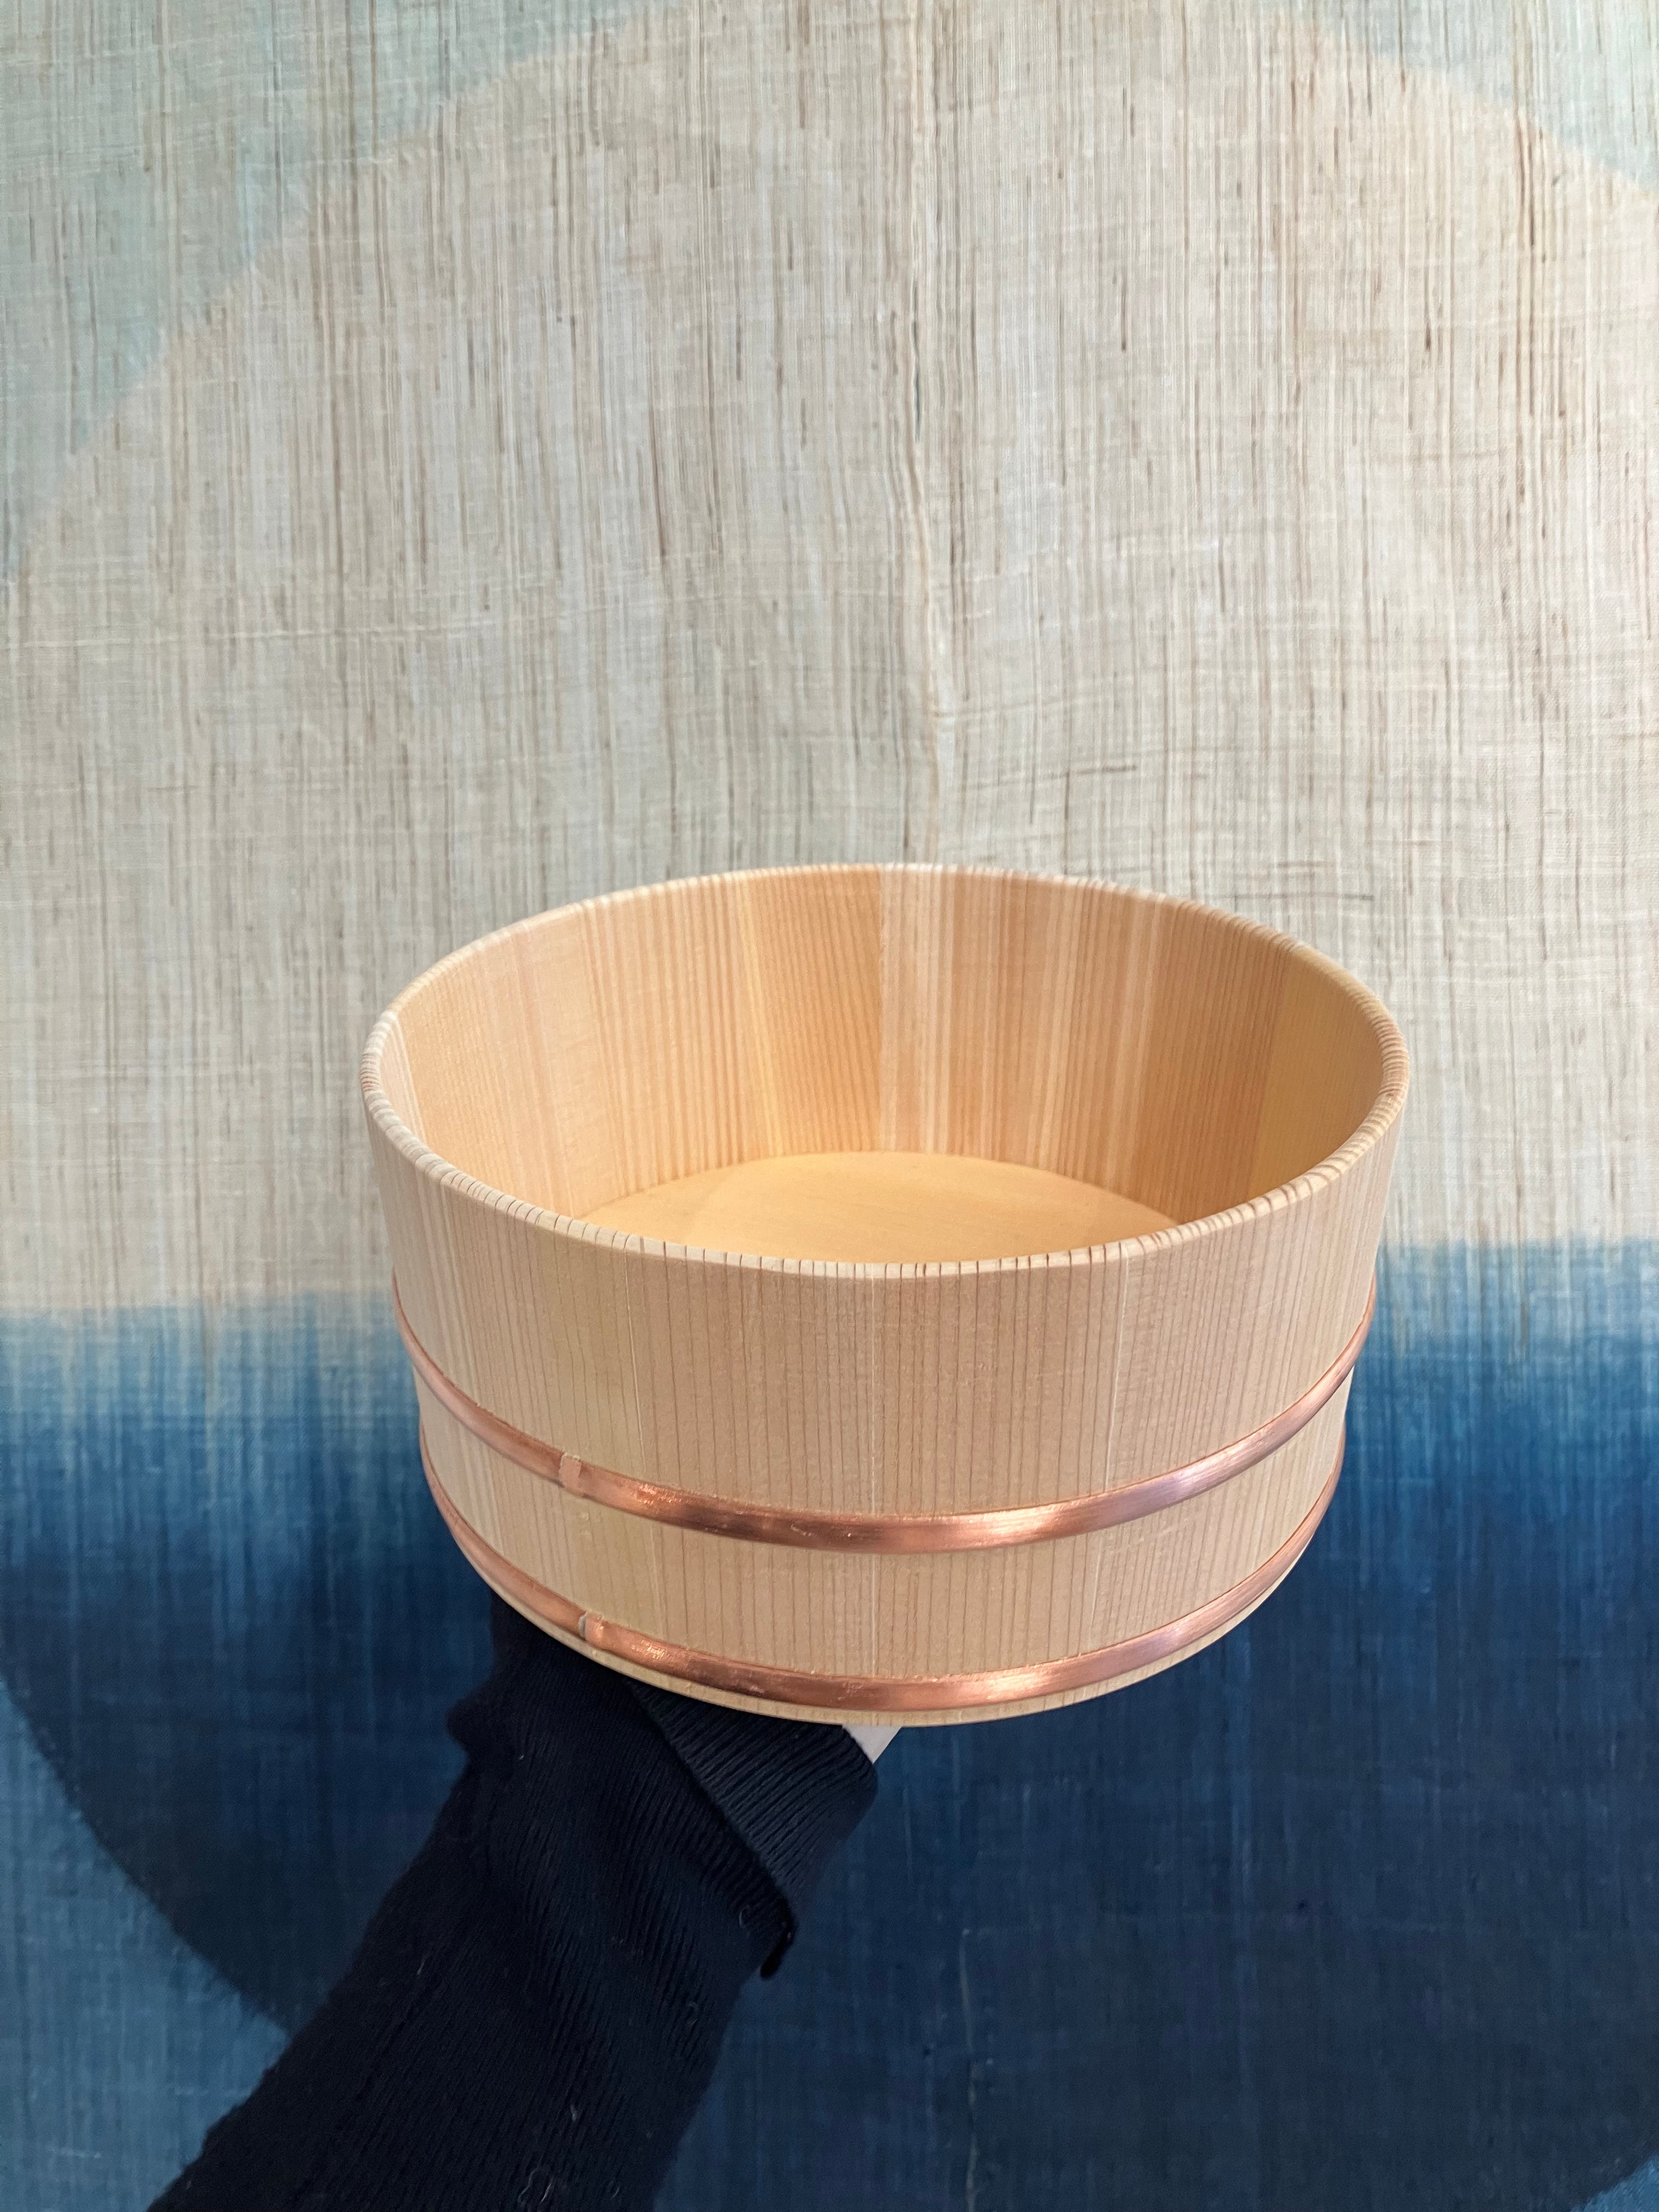 Small wooden tub with steel band